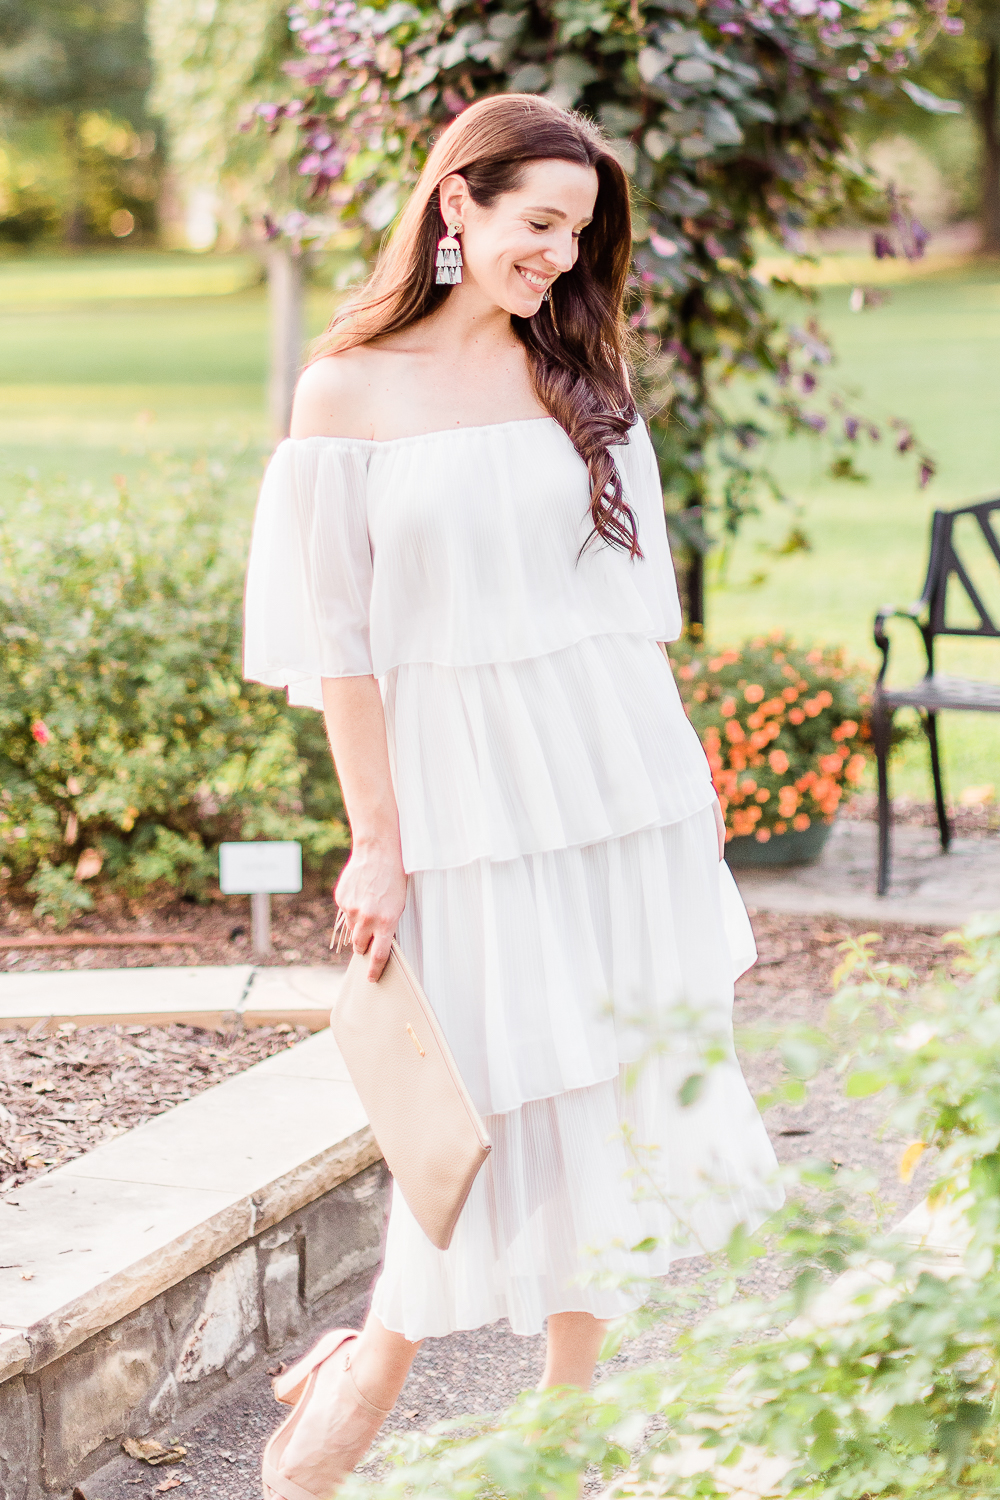 Budget-Friendly Bridal Shower Dress for the Bride-to-Be by affordable fashion blogger Stephanie Ziajka on Diary of a Debutante, Amazon ETCYY Off the Shoulder Ruffle Chiffon Dress, fall LWD outfit